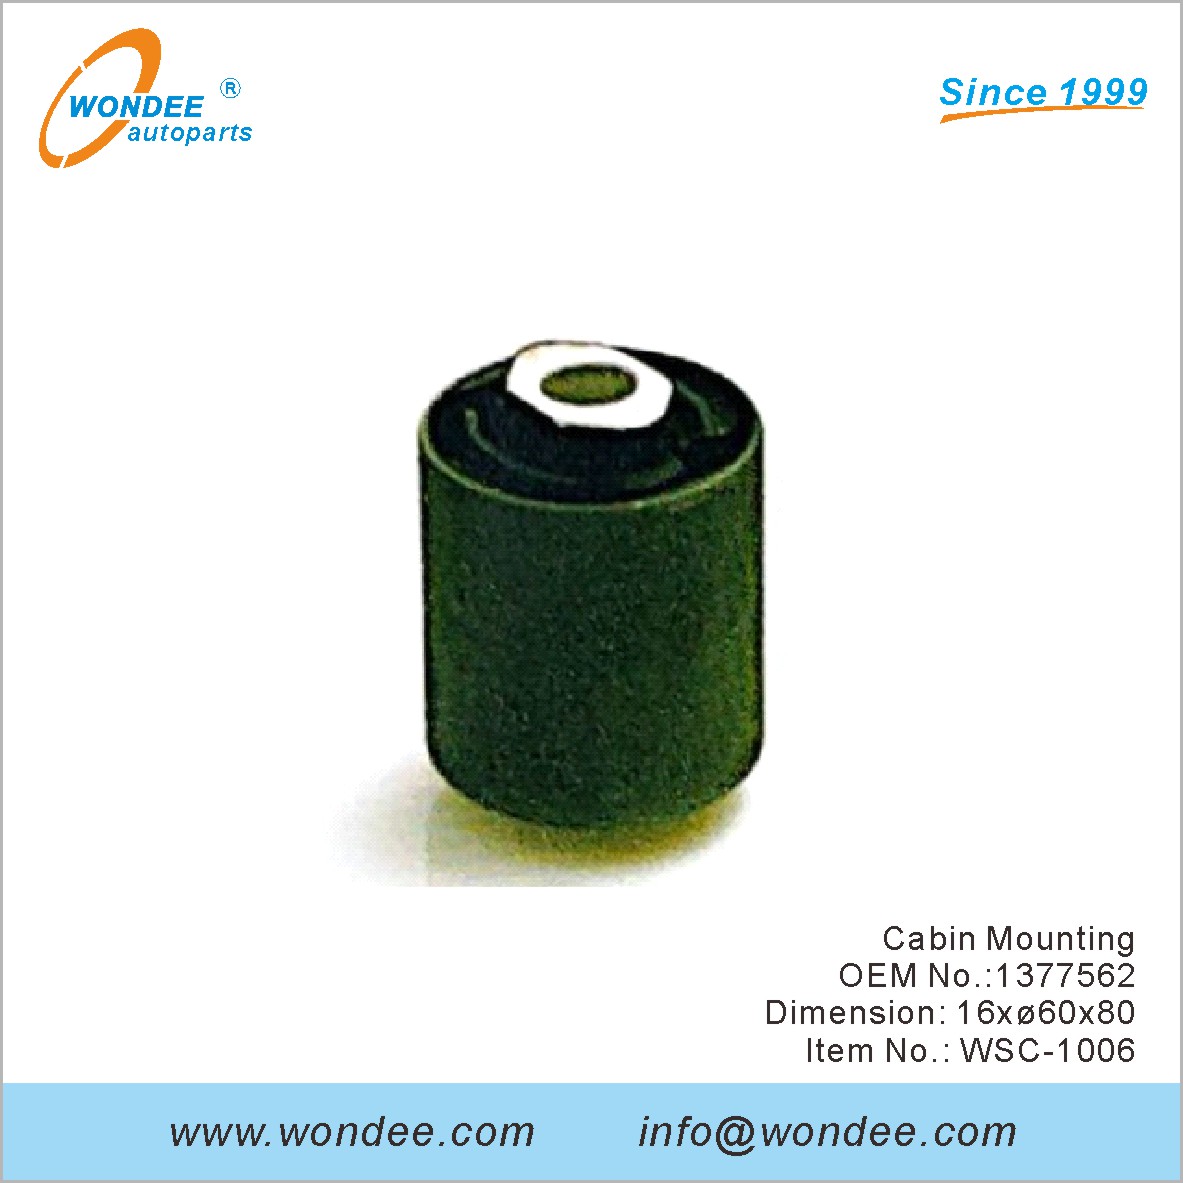 Cabin Mounting OEM 1377562 from WONDEE